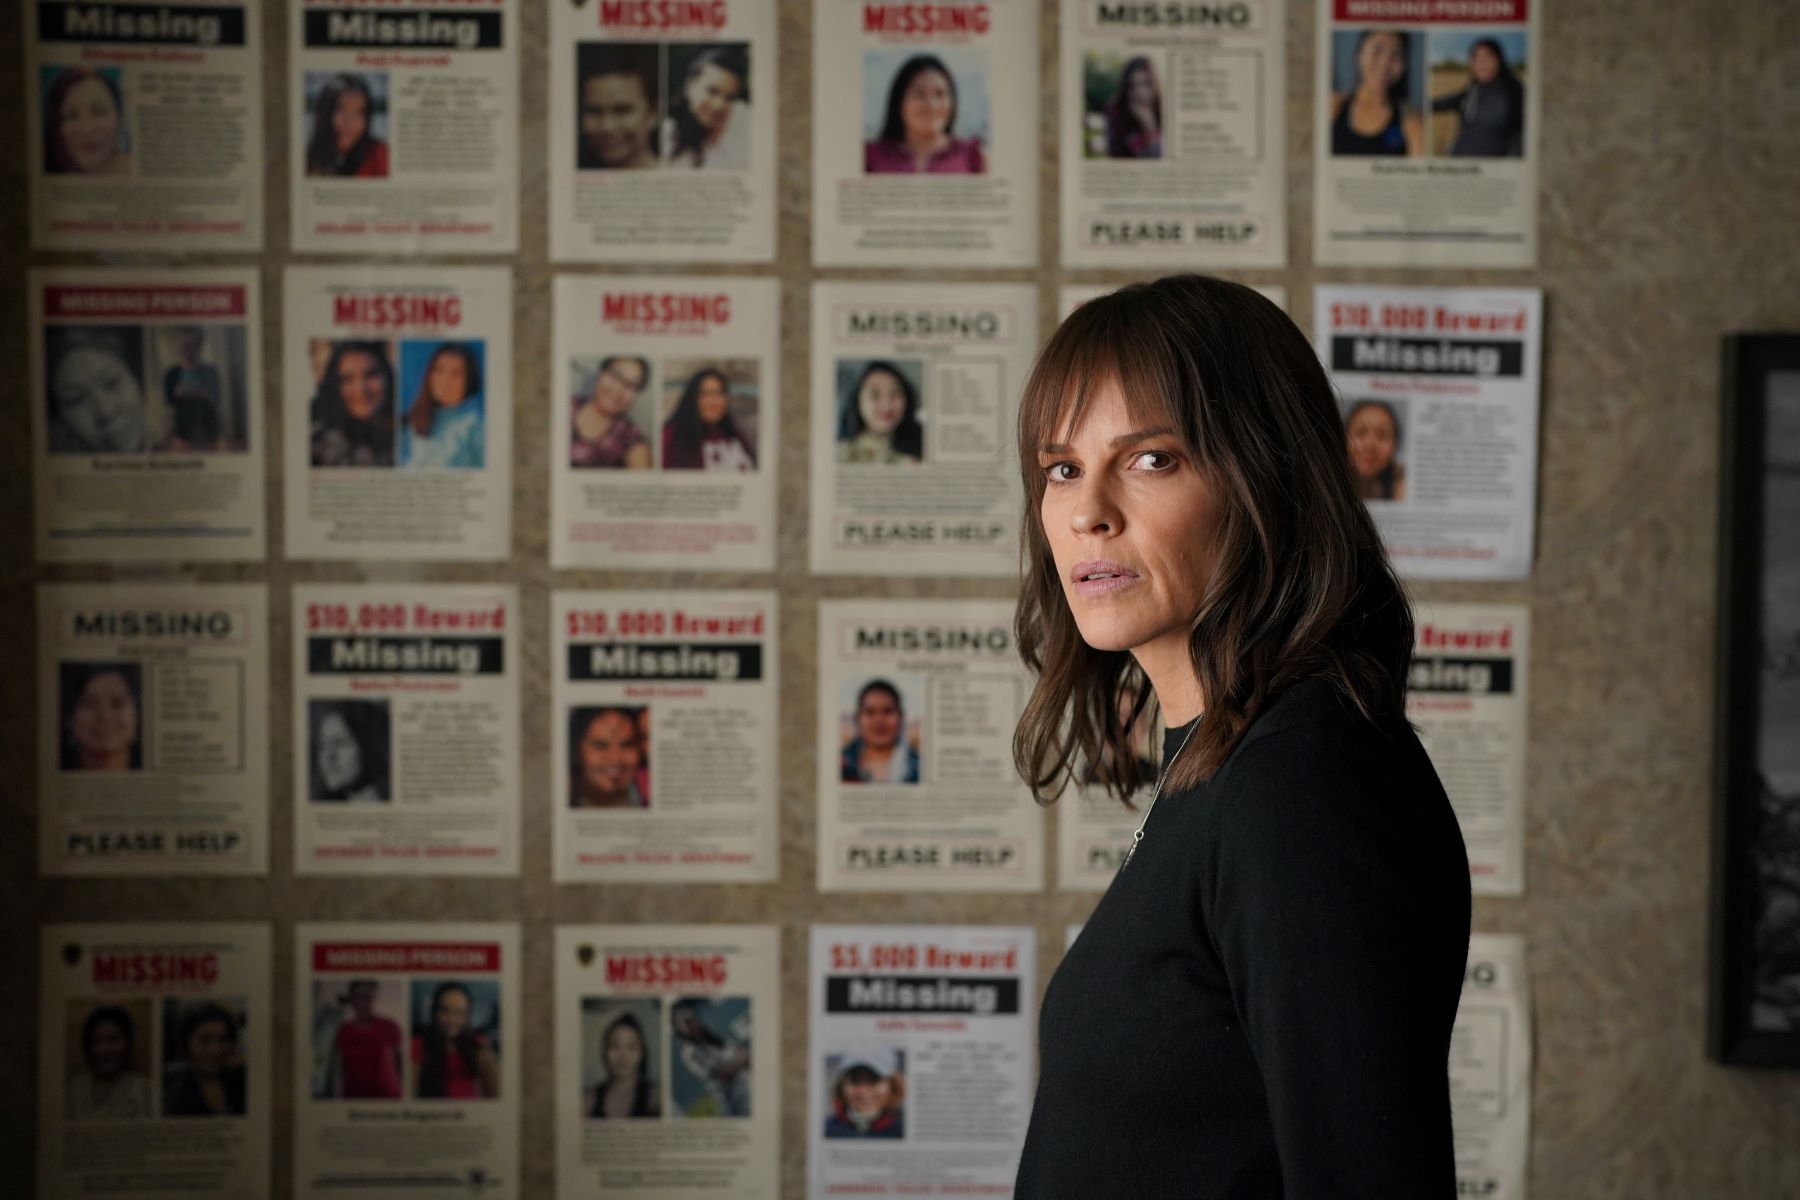 Hilary Swank, in character as Eileen Fitzgerald in 'Alaska Daily' Season 1 Episode 4, which airs tonight, Oct. 27, wears a black long-sleeved shirt.